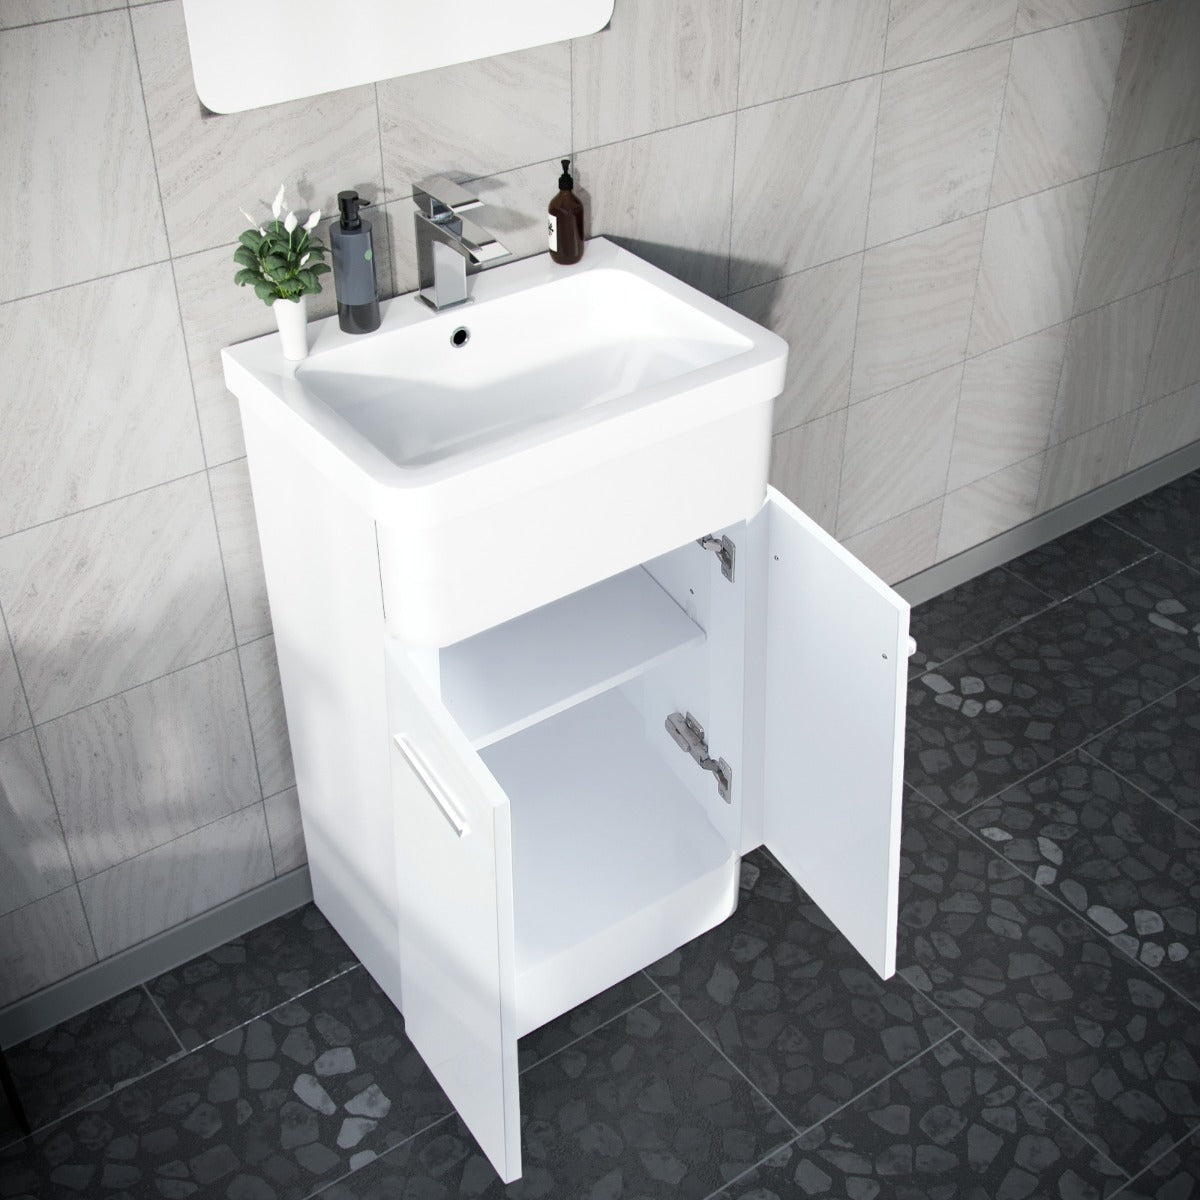 Afern 500mm Vanity Unit, WC Unit And Round BTW Toilet Gloss White